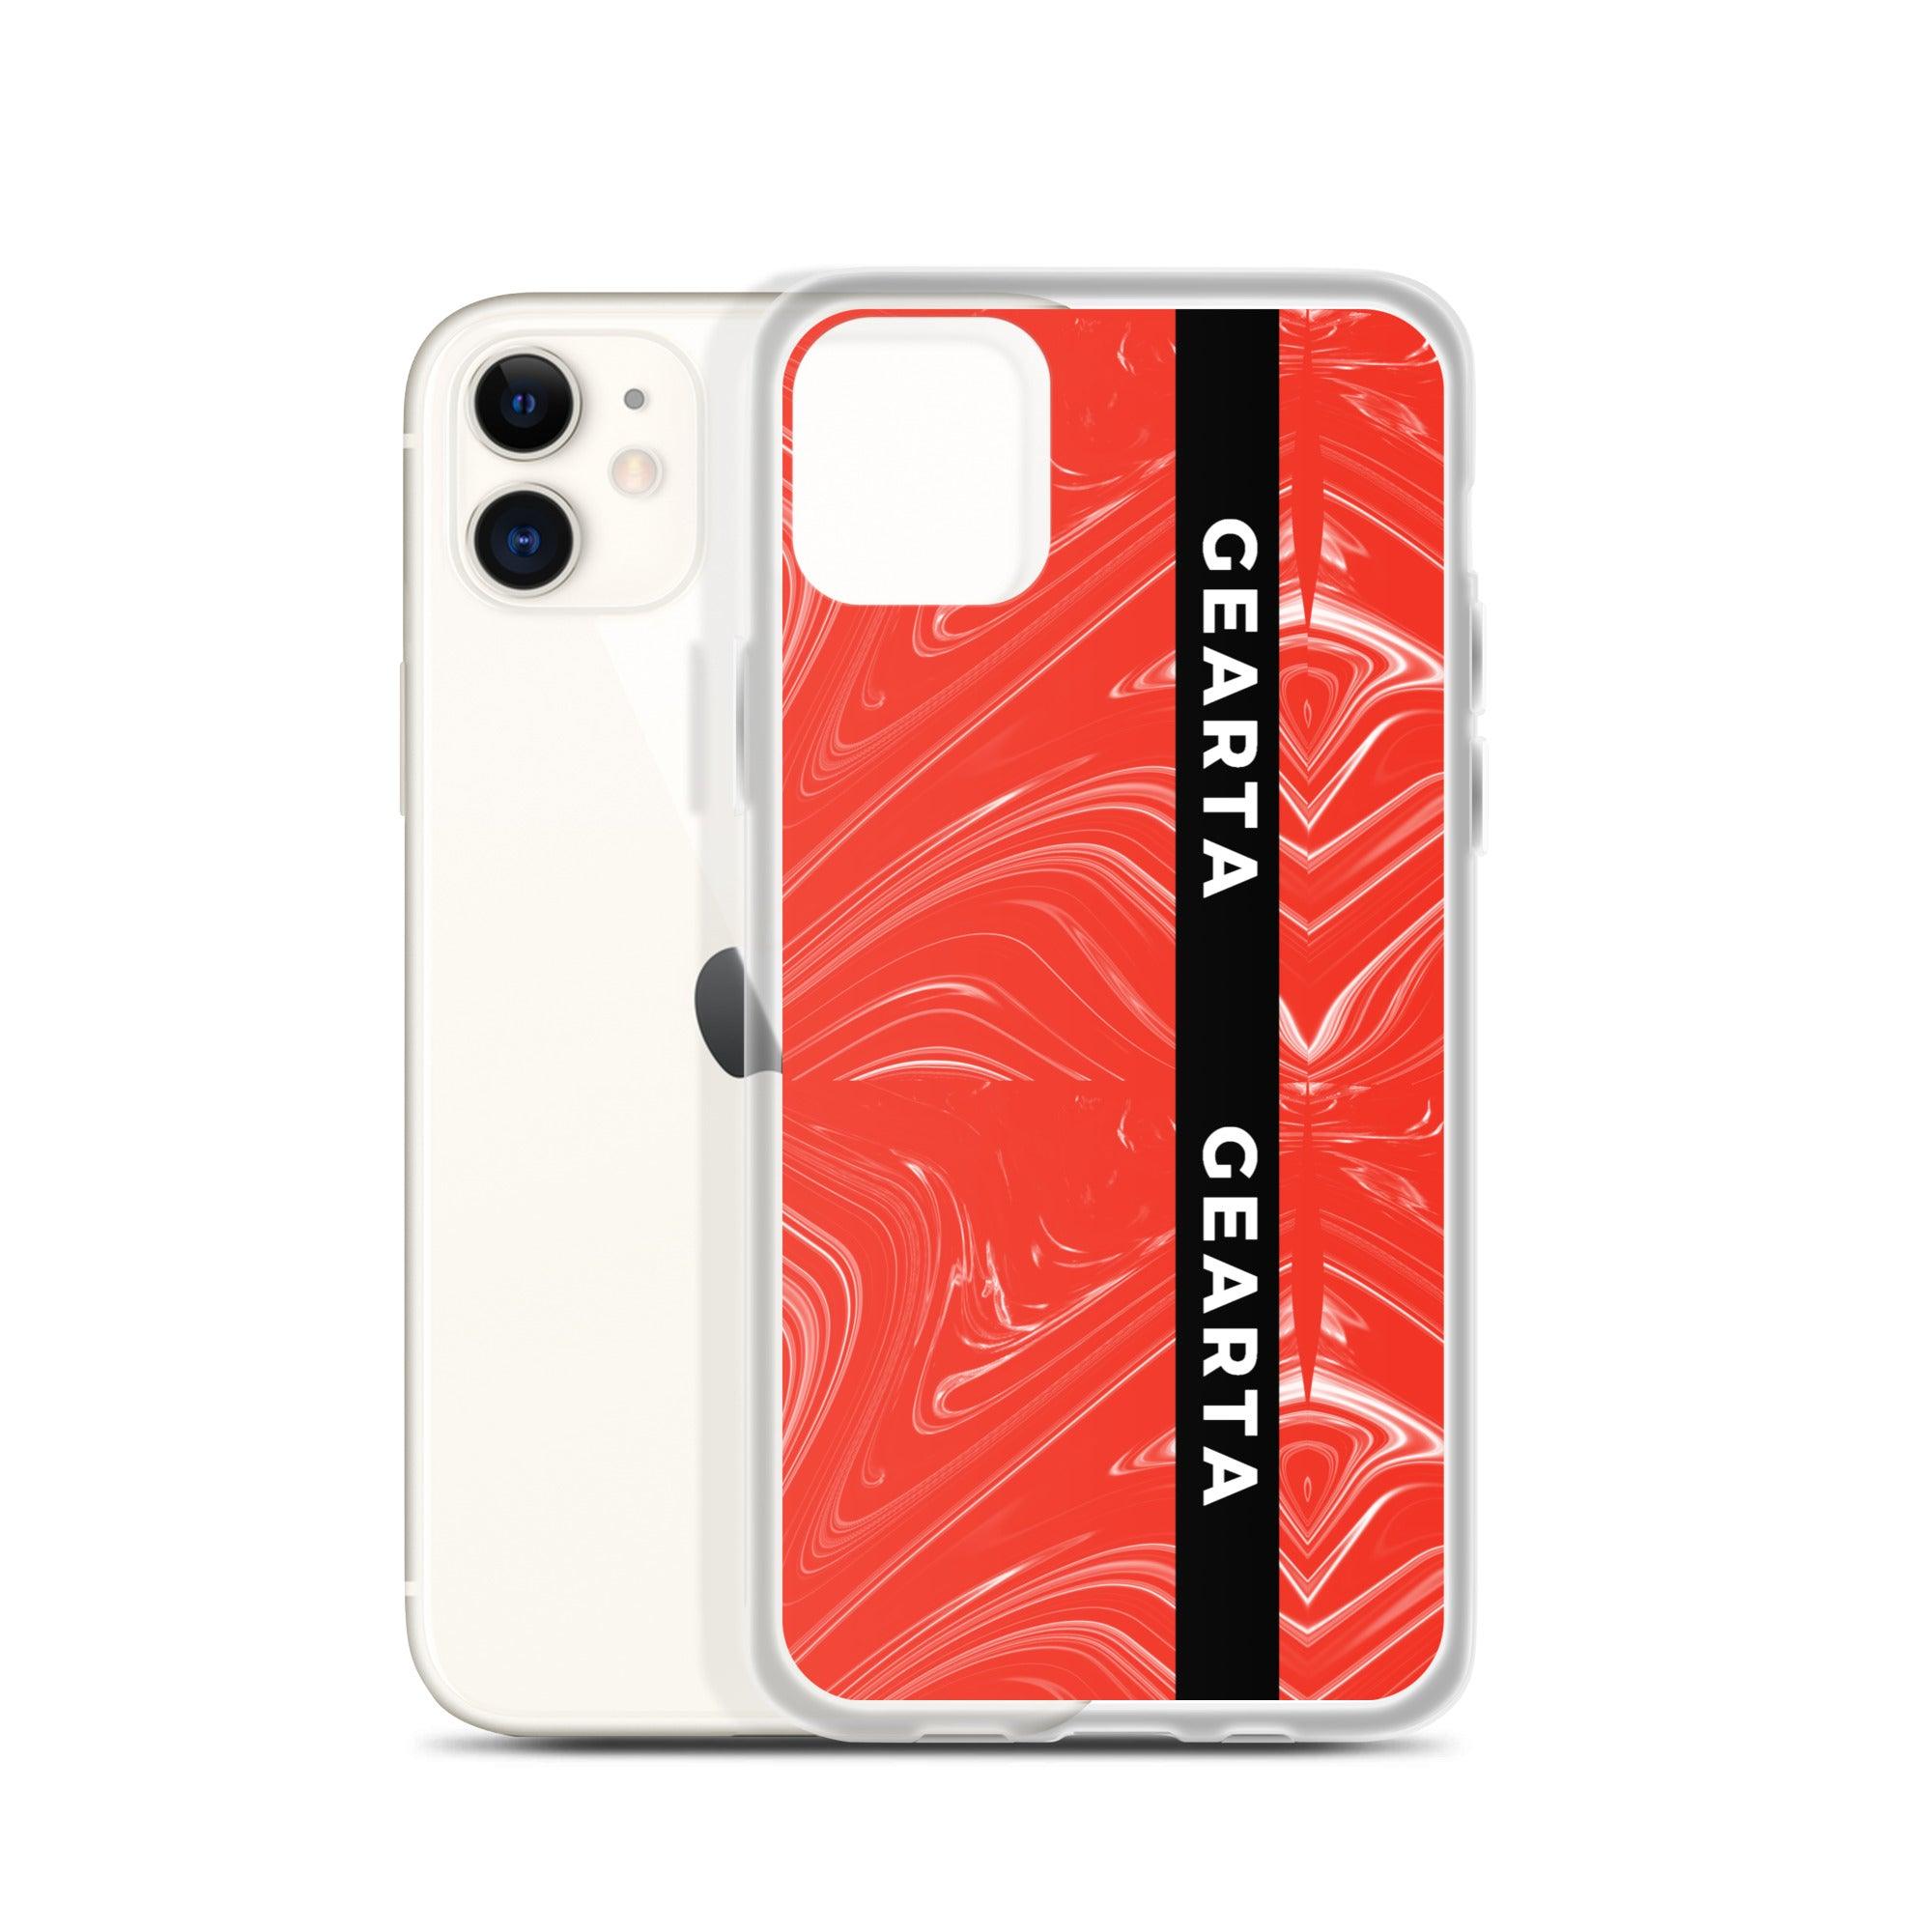 GEARTA - Red Textured Clear iPhone Case